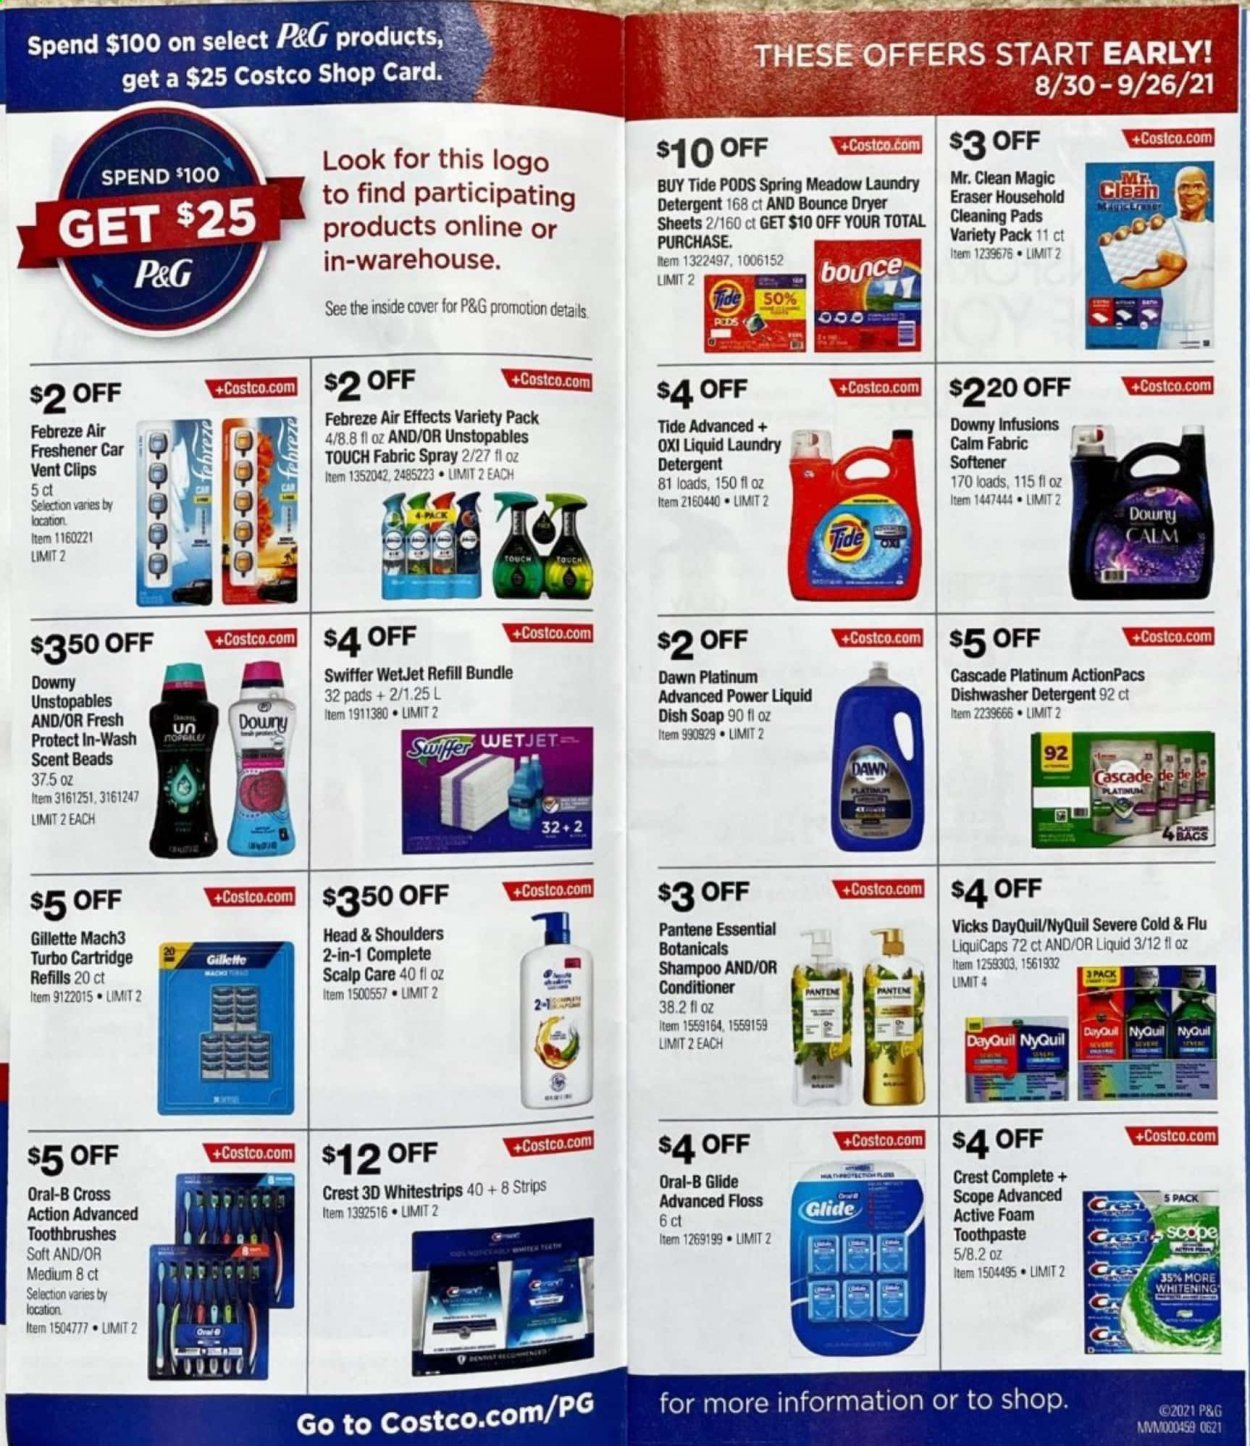 thumbnail - Costco Flyer - Sales products - strips, detergent, Febreze, Swiffer, cleaning pad, Cascade, Tide, Unstopables, fabric softener, laundry detergent, Bounce, dryer sheets, Downy Laundry, shampoo, soap, Oral-B, toothpaste, Crest, conditioner, Head & Shoulders, Pantene, Gillette, Vicks, bag, WetJet, eraser, air freshener, cartridge, scope, tong, DayQuil, Cold & Flu, NyQuil. Page 3.